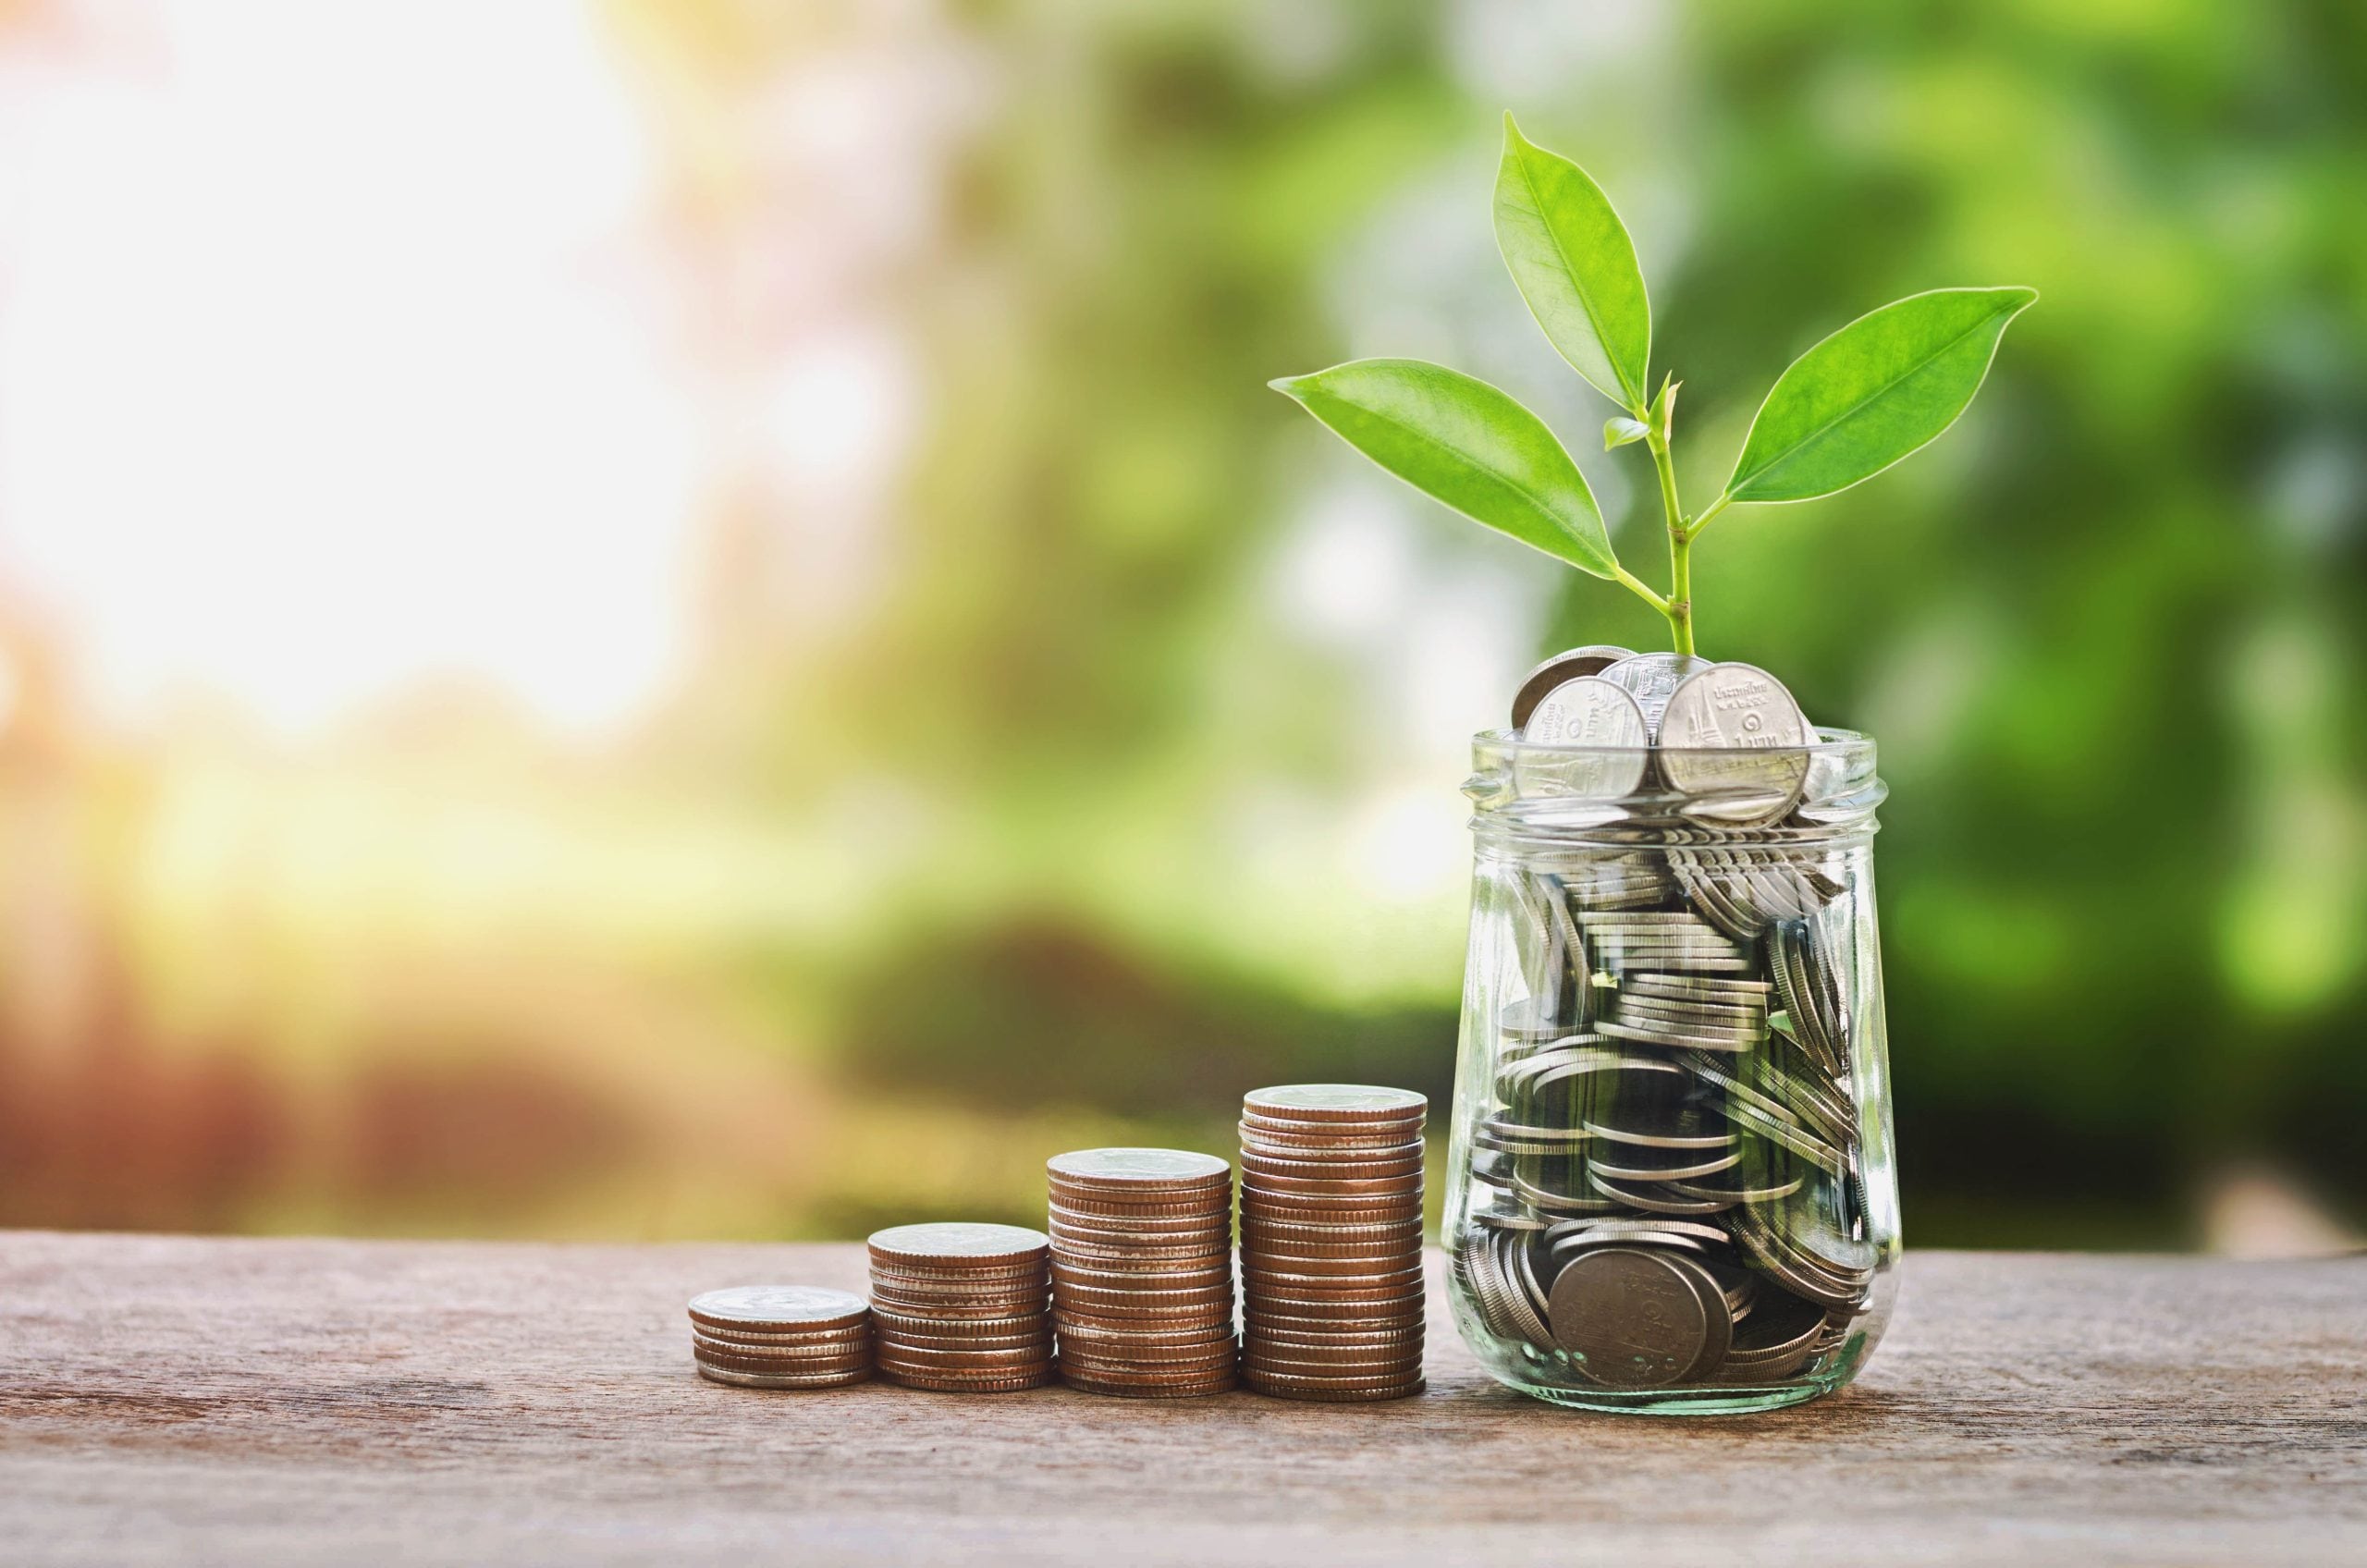 The image depicts a small plant growing in a glass jar filled with coins, with a concept of money saving.